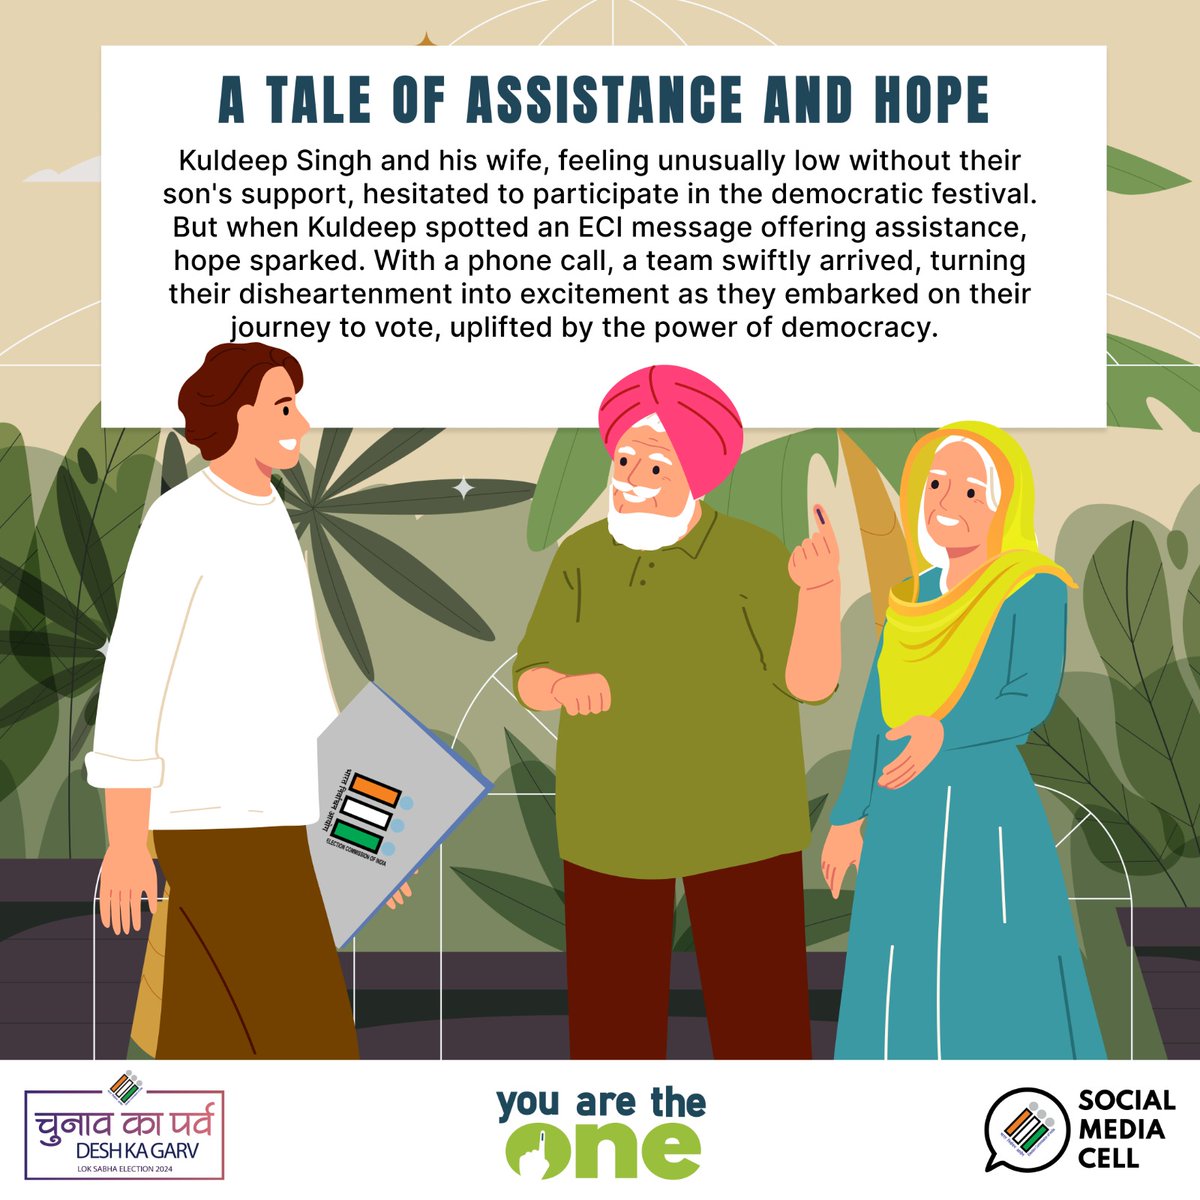 A Tale of Assistance and Hope ✨ Read the story of Kuldeep Singh and his wife about their journey of vote #YouAreTheOne #ChunavKaParv #DeshKaGarv #GeneralElection2024